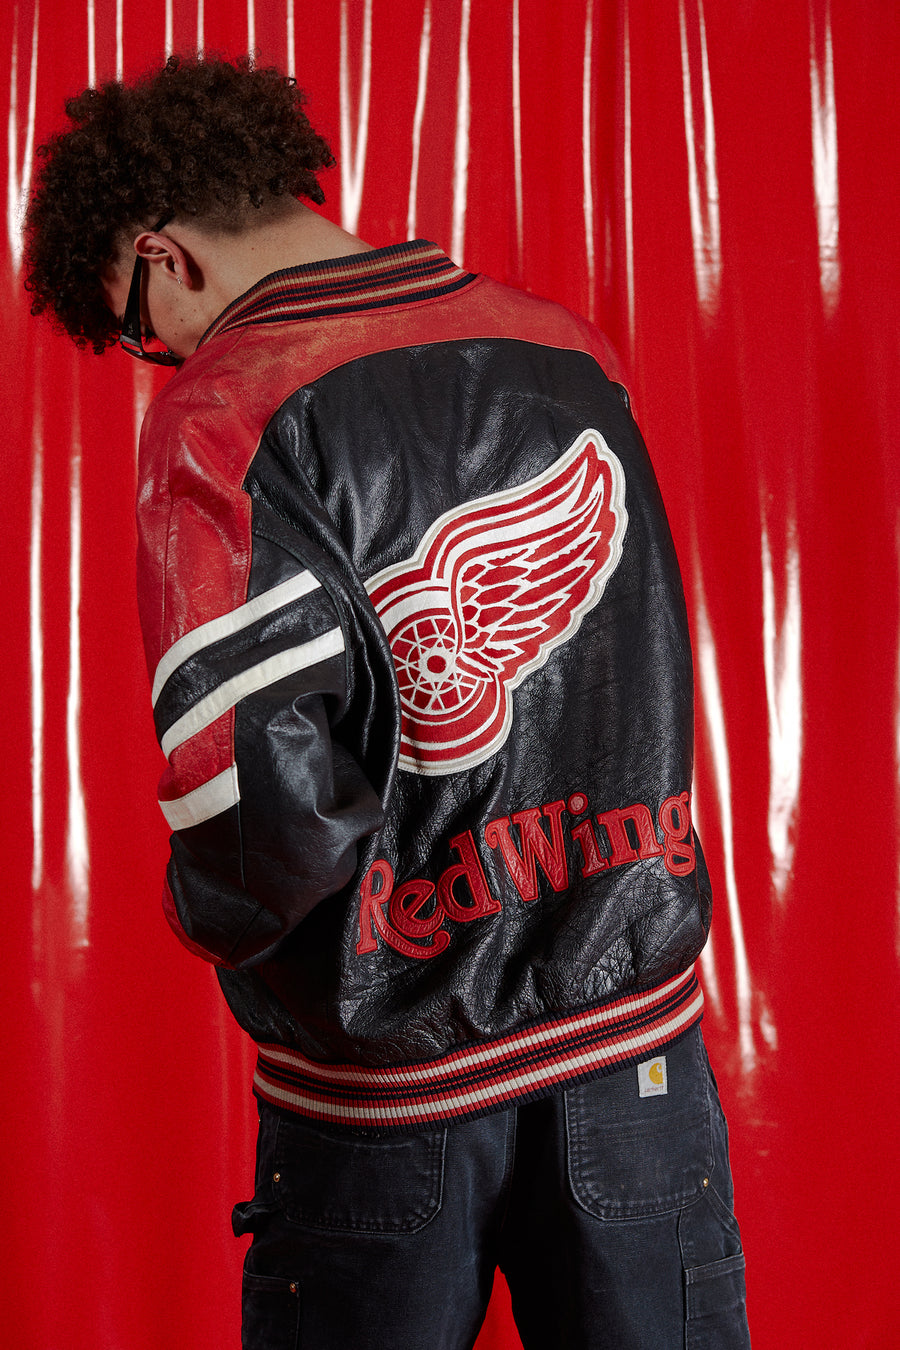 Detroit Red Wings Leather Jacket in a vintage style from thrift store Twise Studio